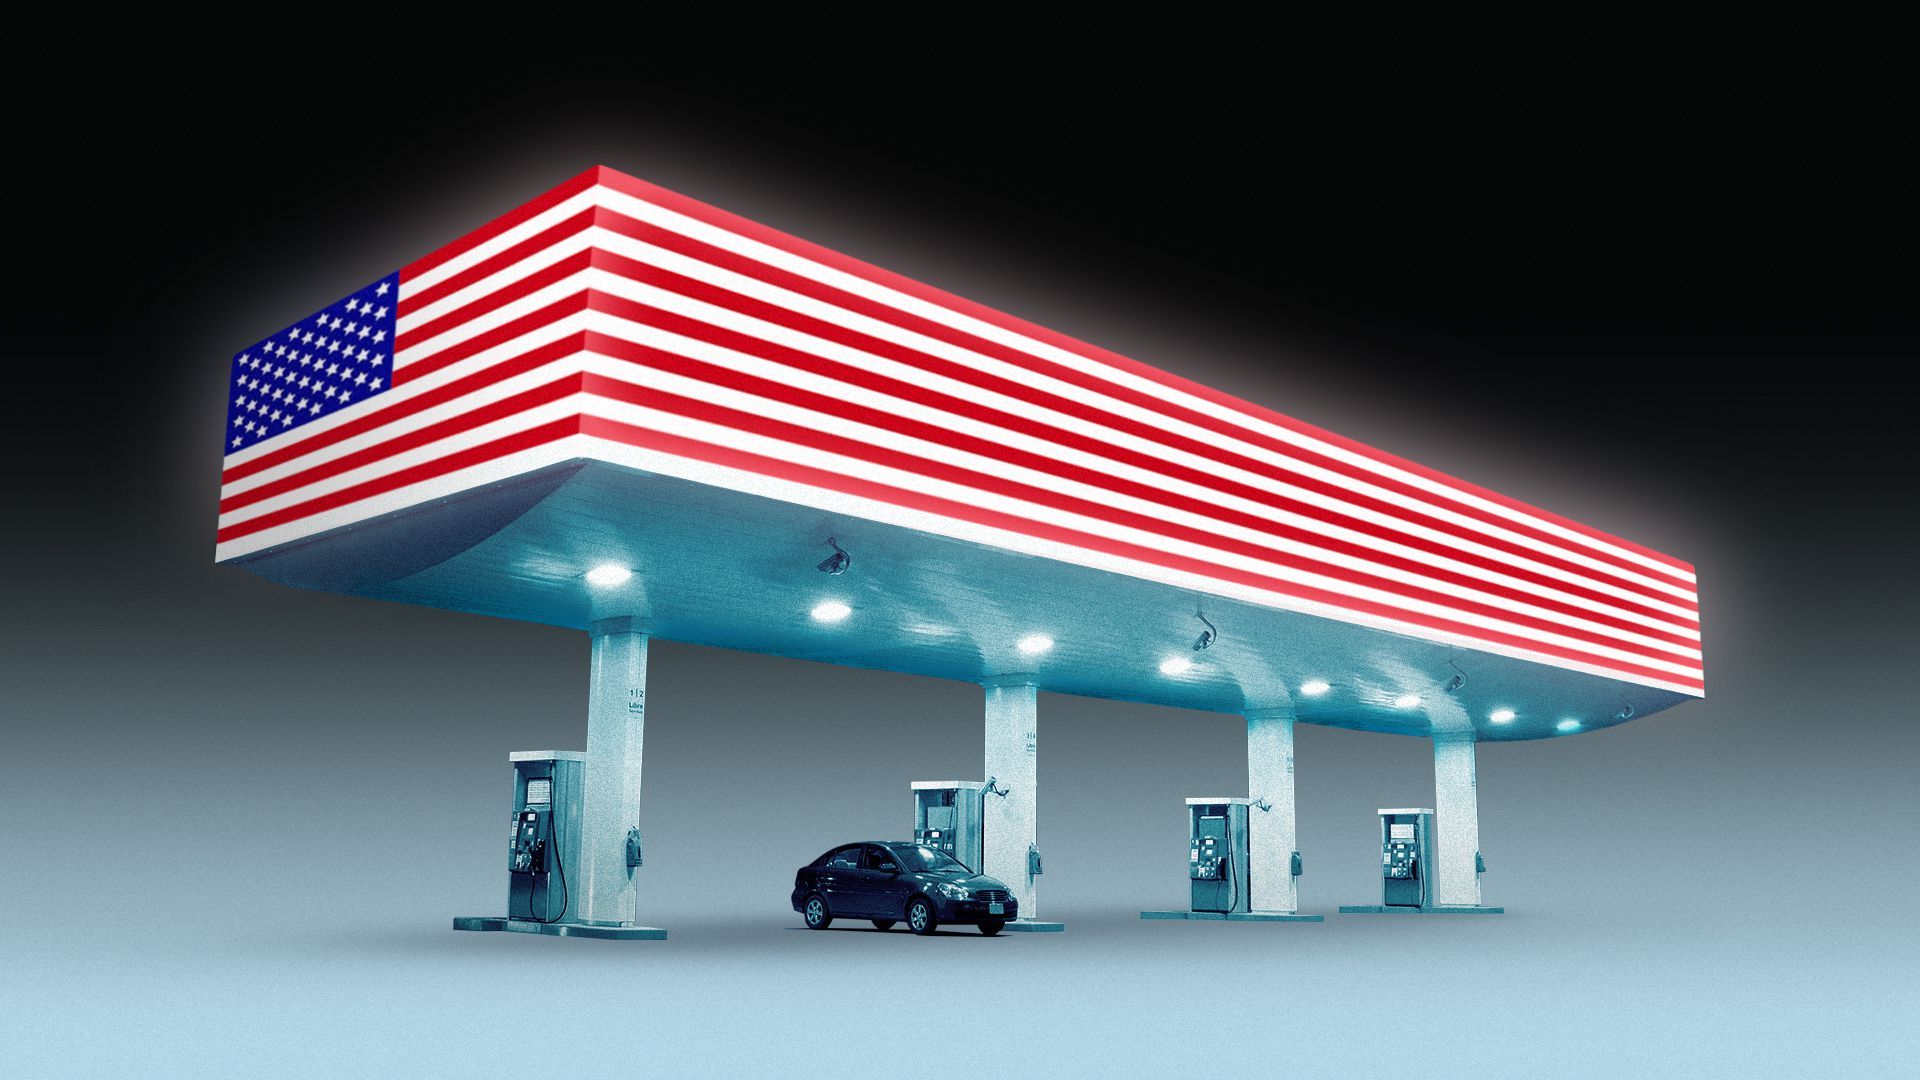 Illustration of a gas station covered in an American flag